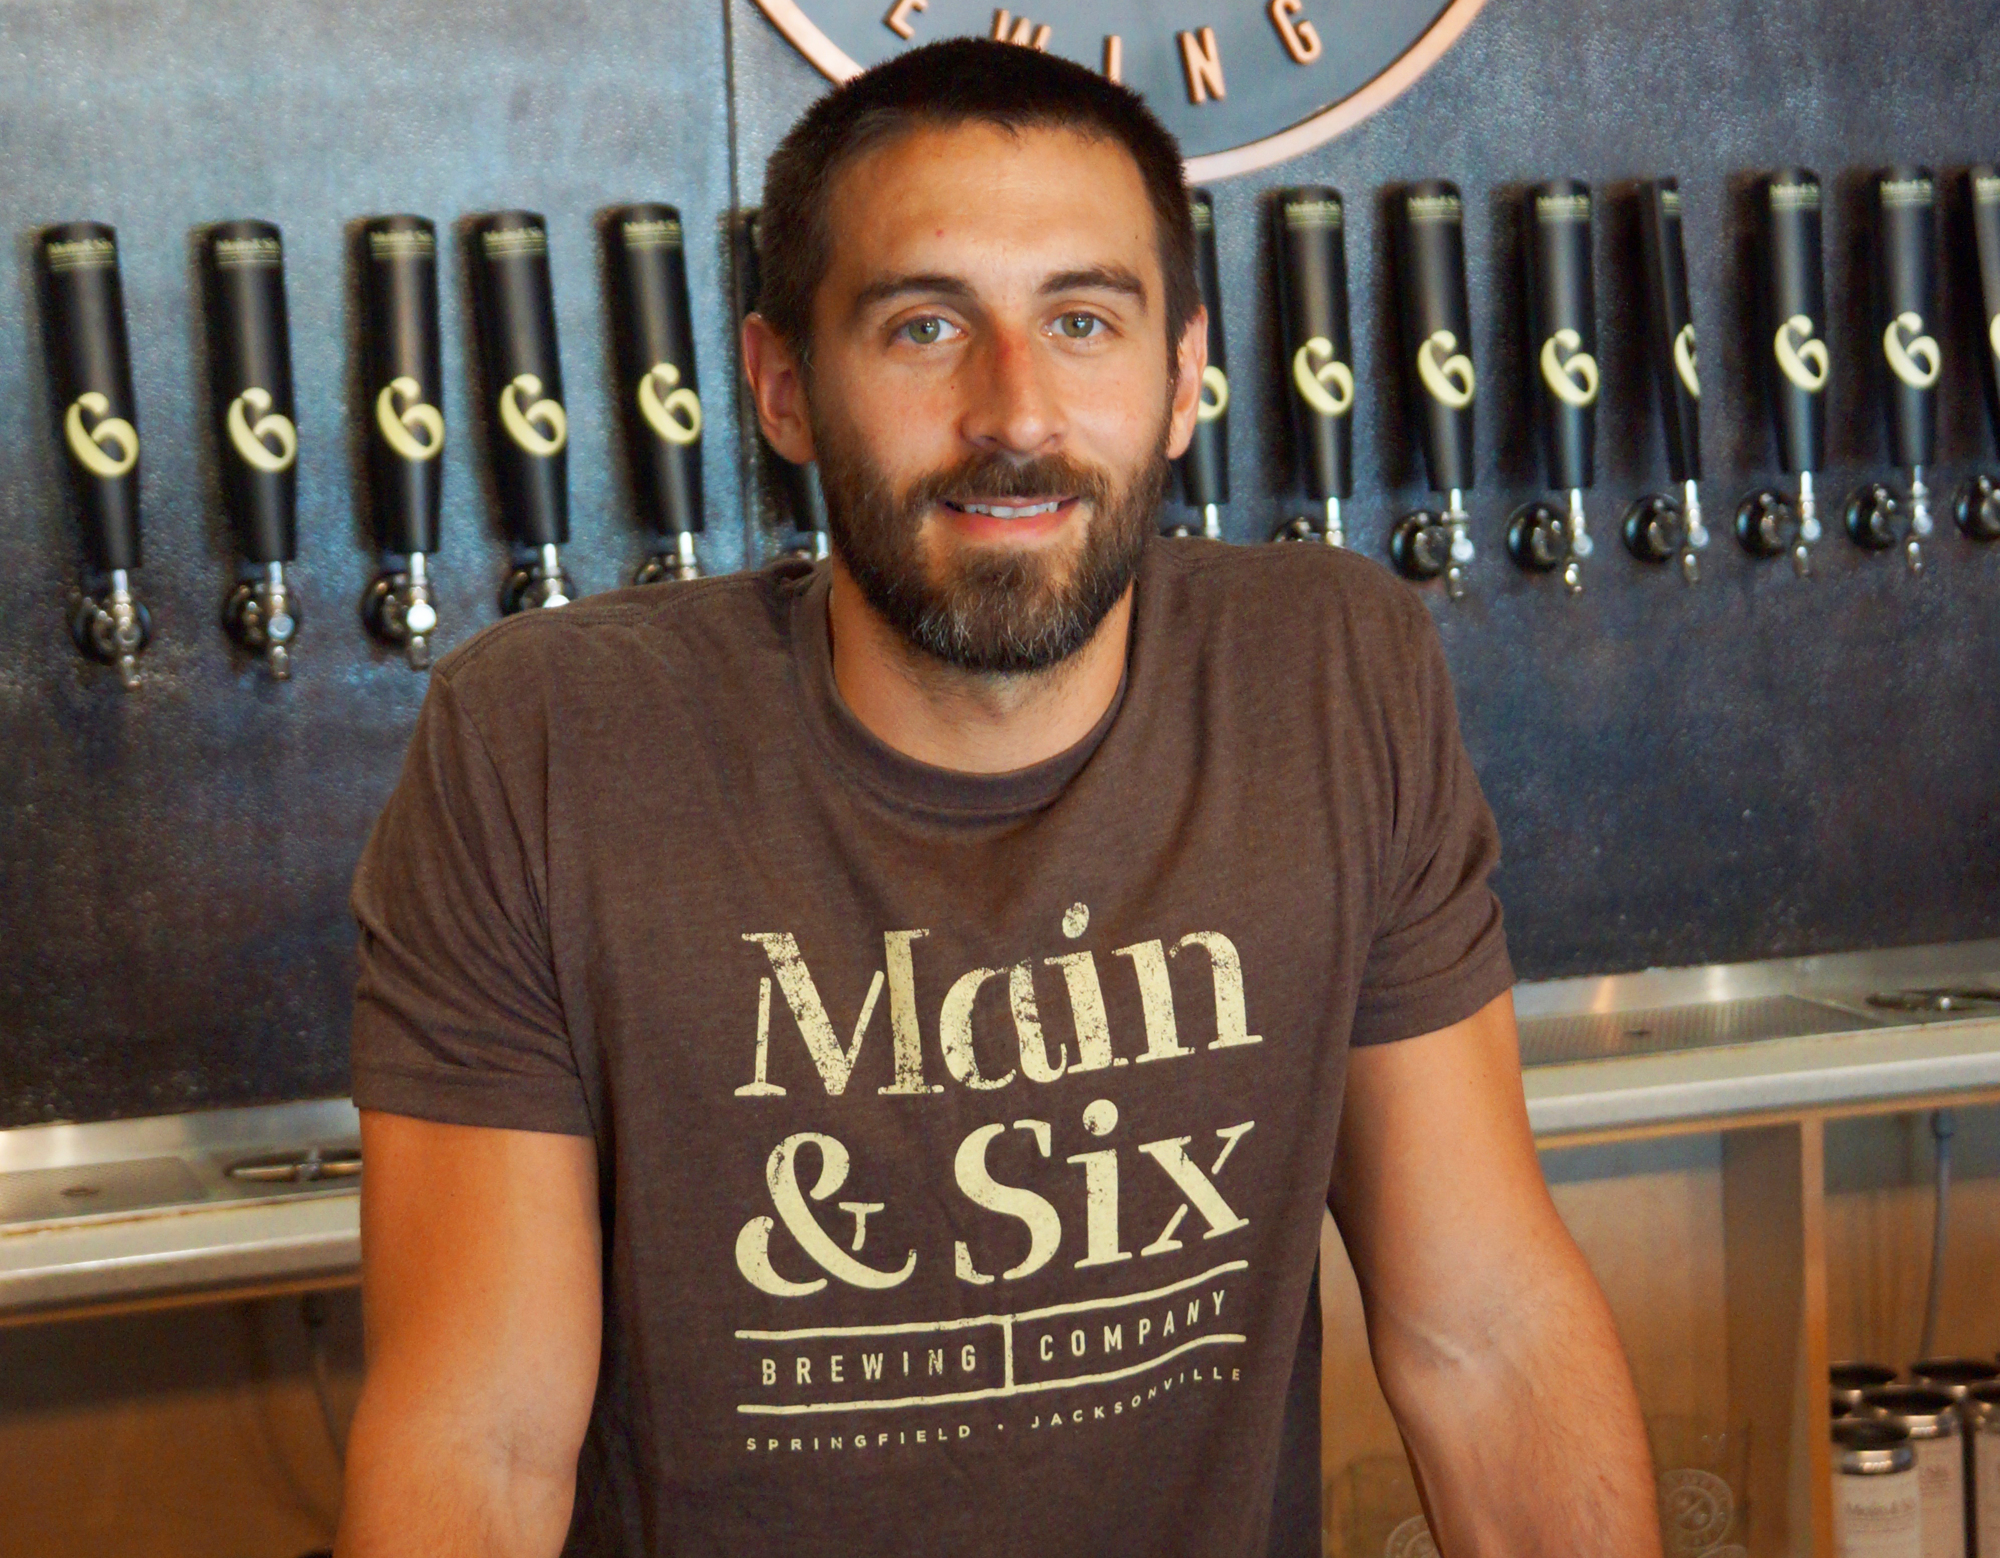 Main & Six Brewing Company owner Dennis Espinosa said plans to expand his business have been in the works for two years and were delayed by the pandemic.